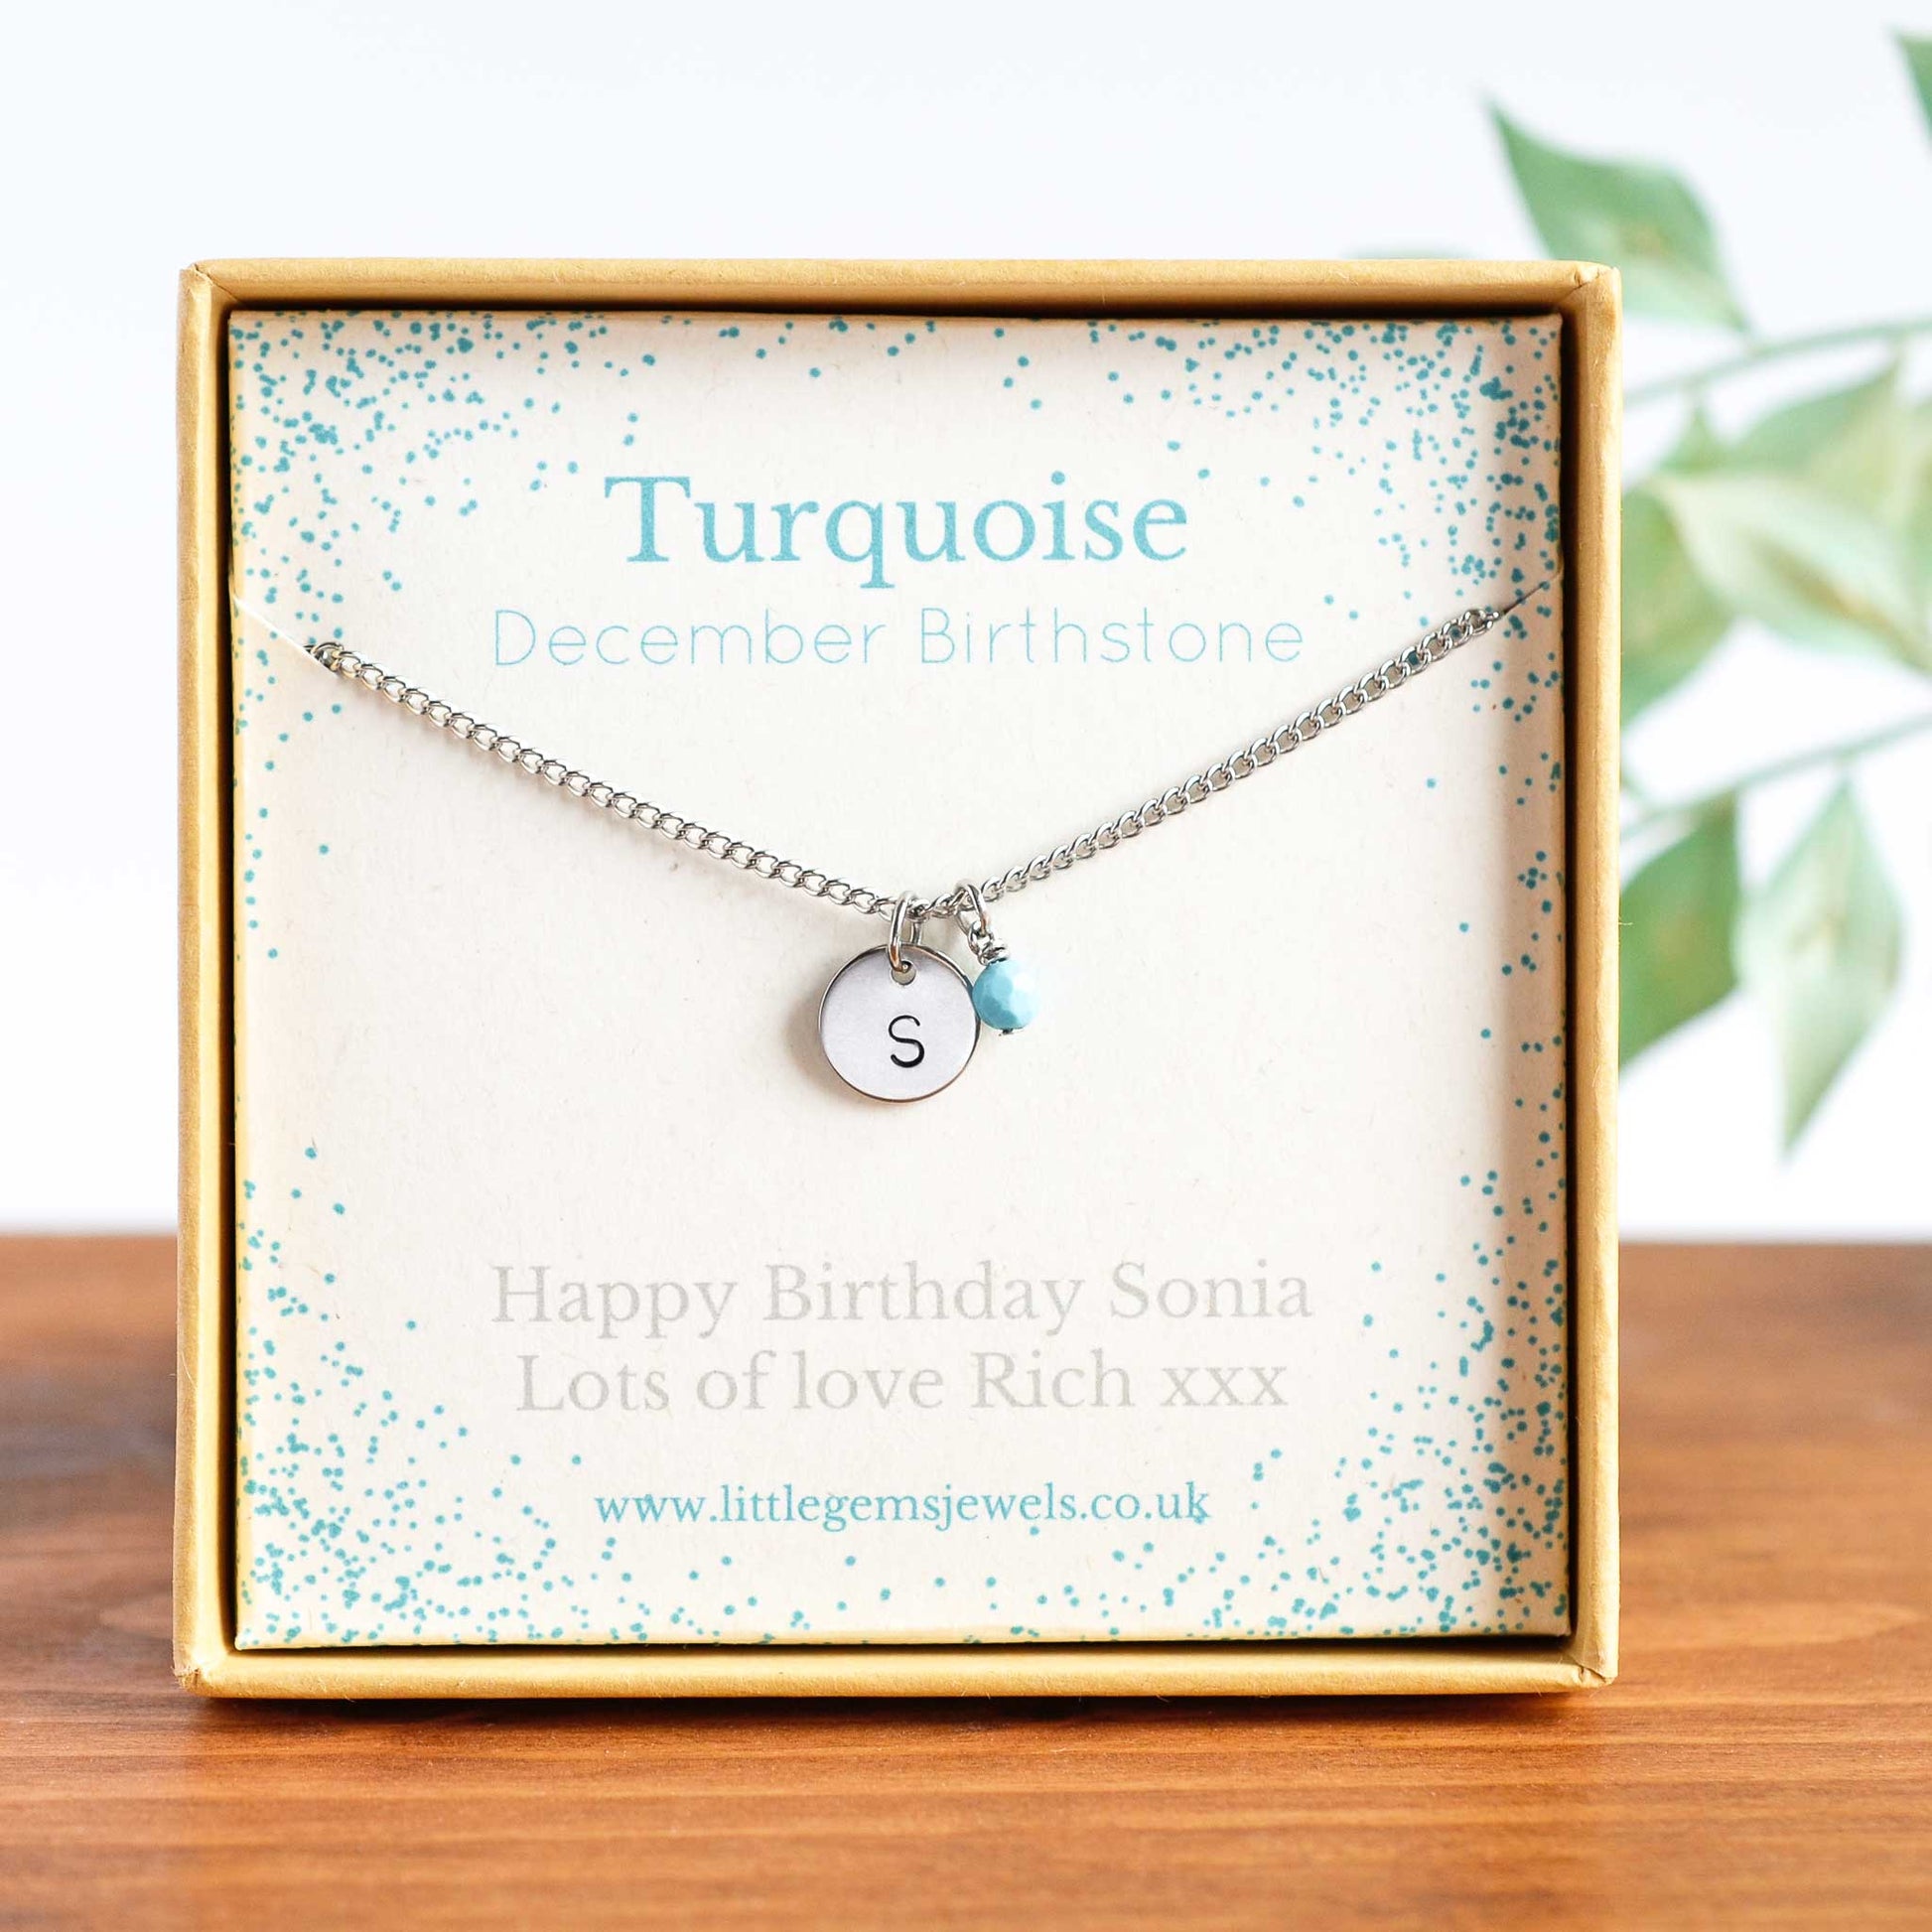 December Birthstone necklace with initial charm & personalised gift message in eco friendly gift box